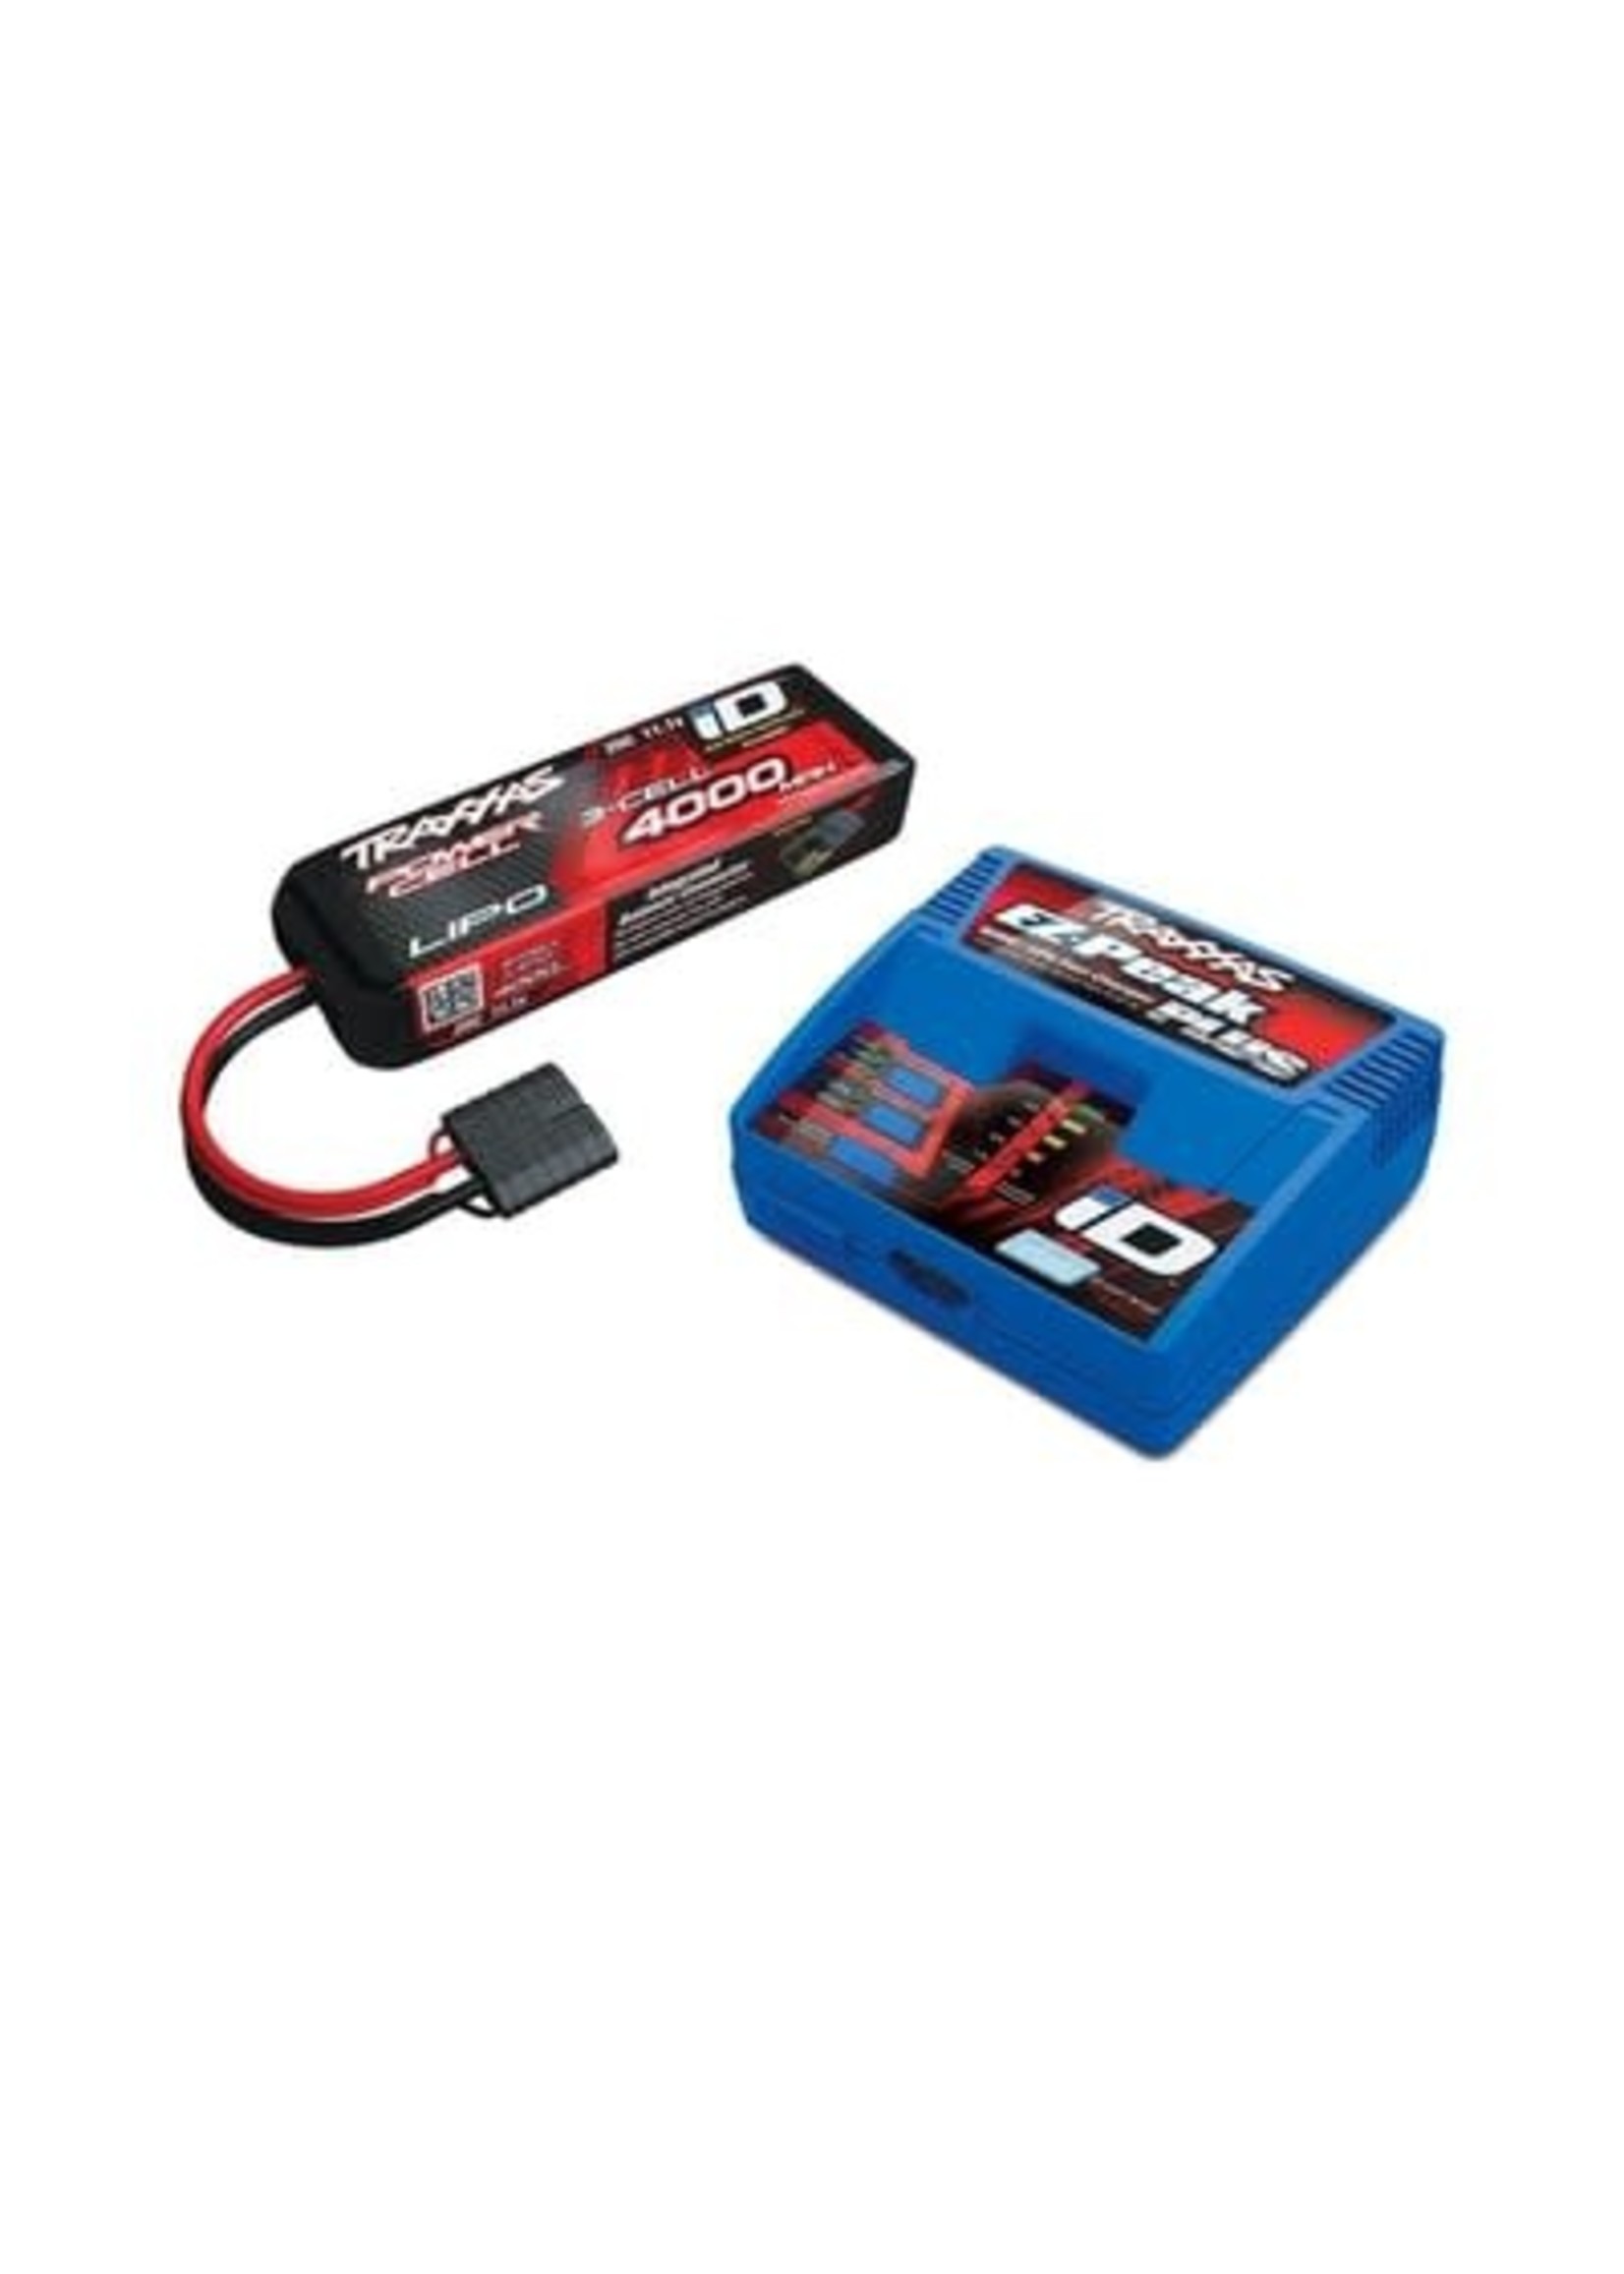 Traxxas 2994 Battery/charger completer pack (includes #2970 iD charger (1), #2849X 4000mAh 11.1v 3-Cell 25C LiPo Battery (1))